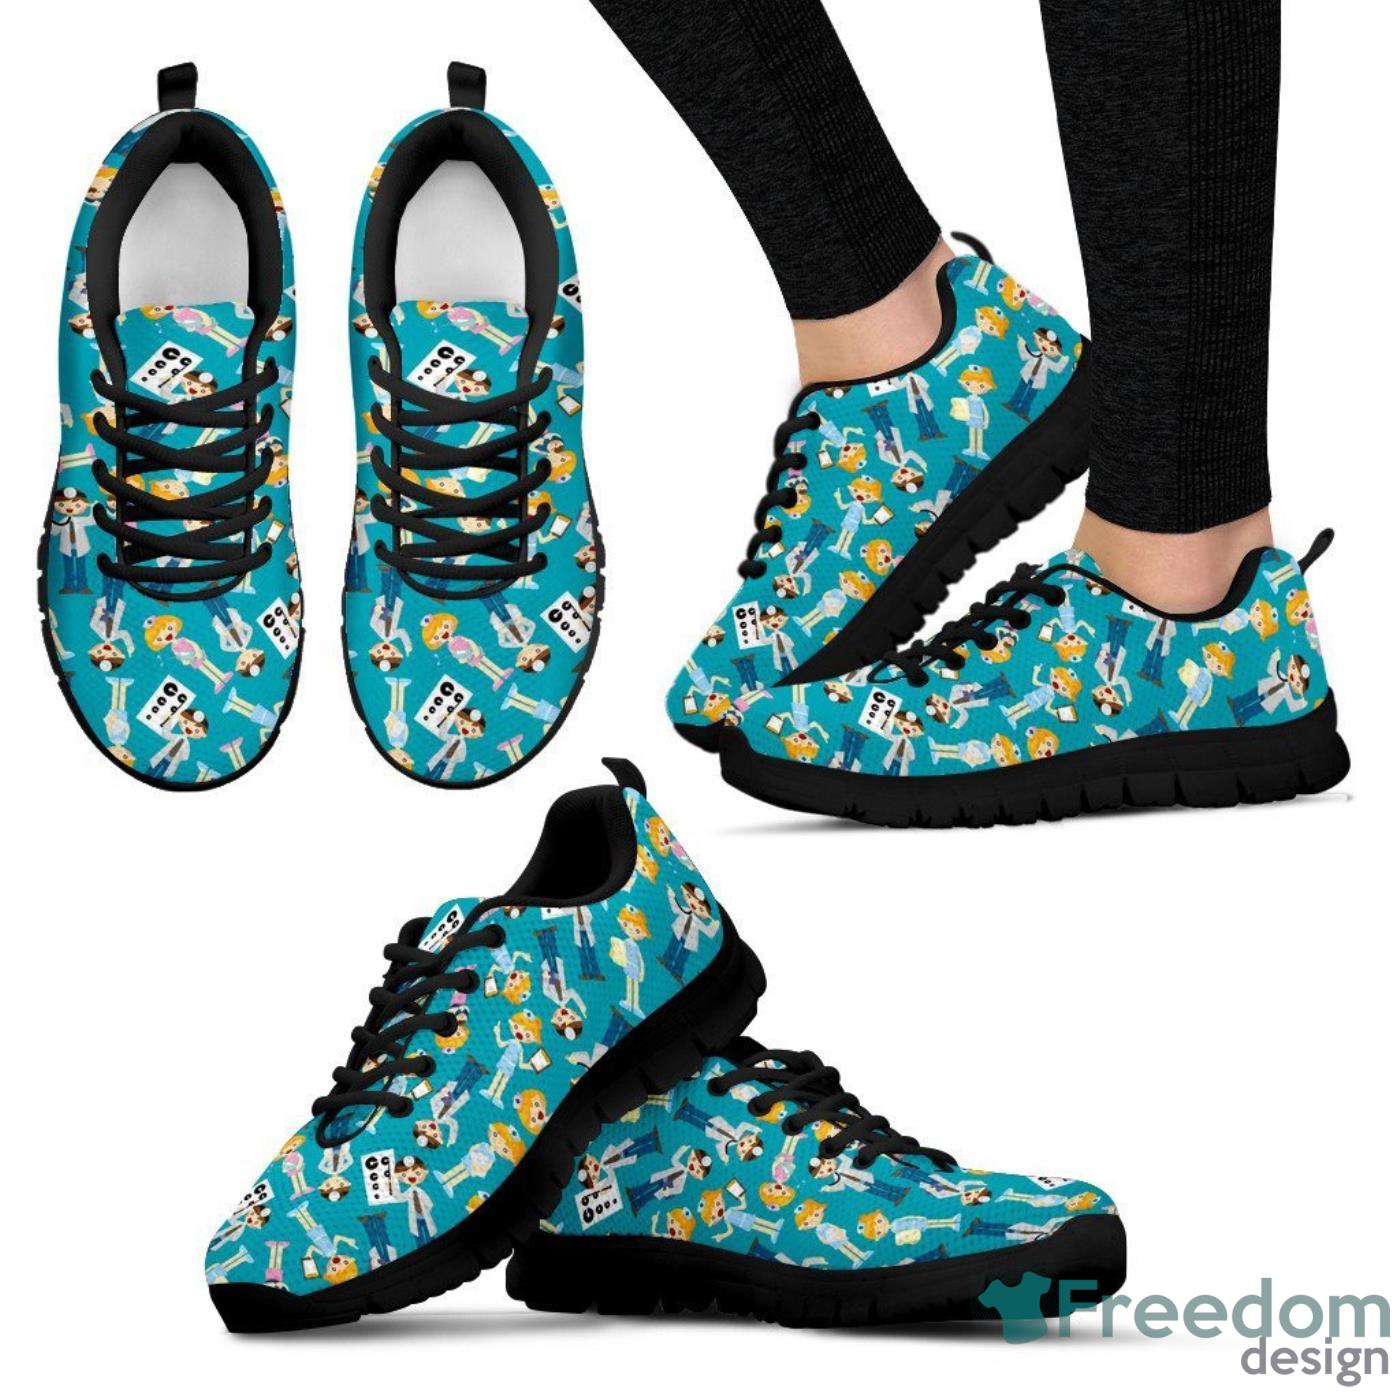 Nurse Surgeon Sneakers For Men And Women Product Photo 2